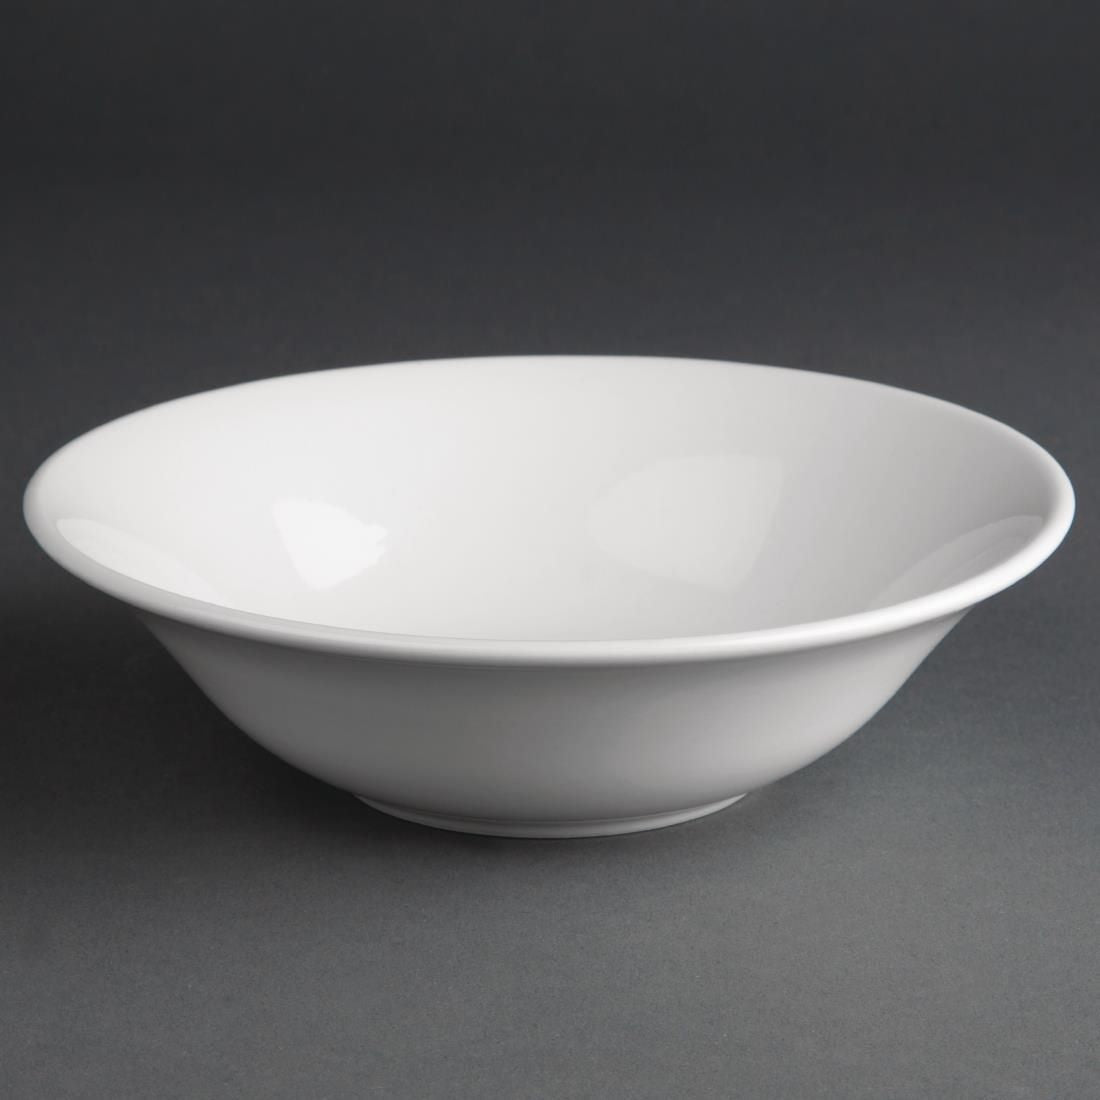 Athena Hotelware Oatmeal Bowls 153mm (Pack of 12) CC213 JD Catering Equipment Solutions Ltd